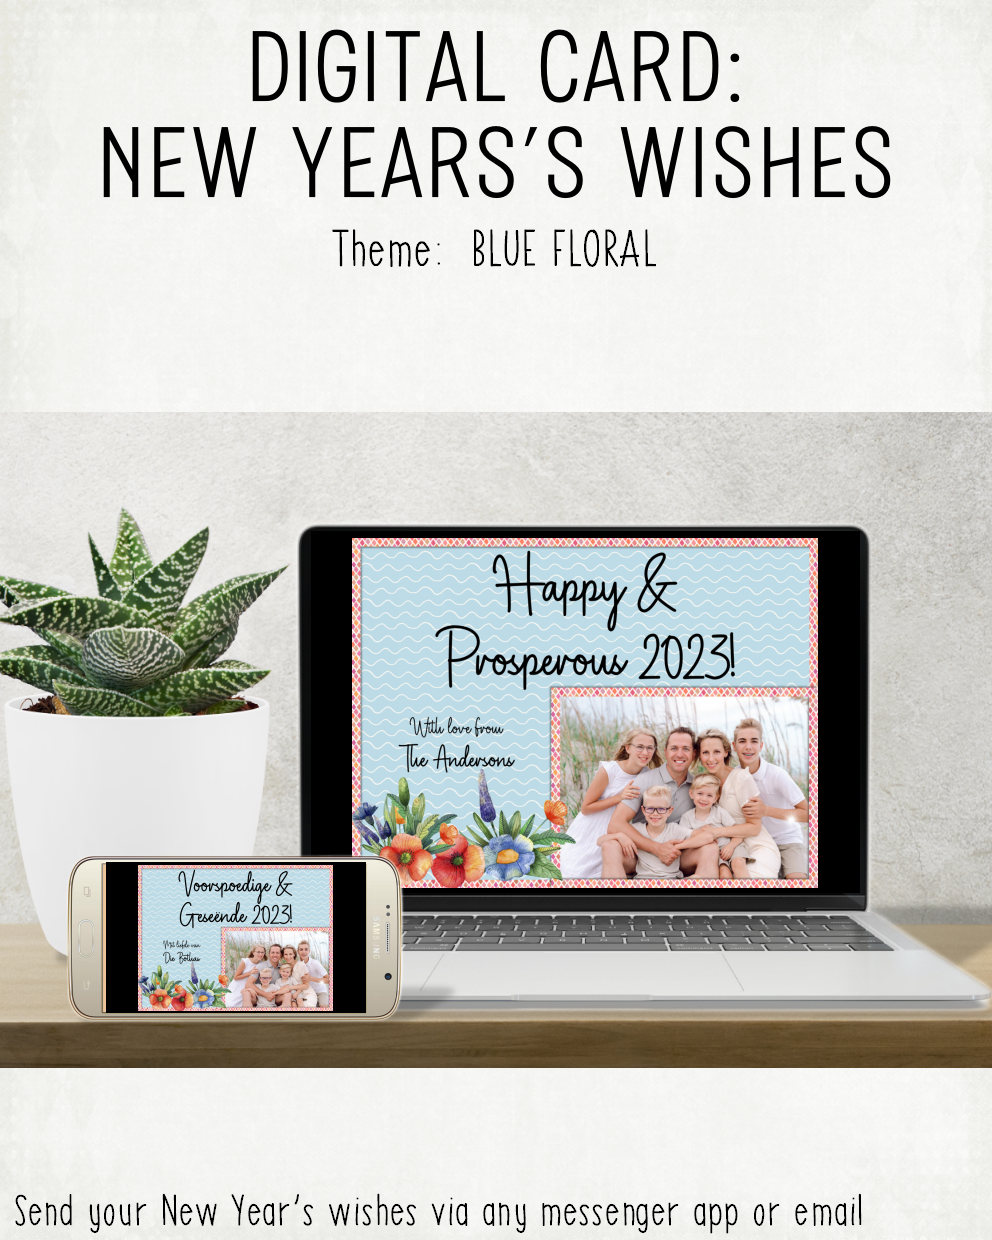 DIGITAL CARD: New Year's Wishes - Blue Floral (Afrikaans & English)